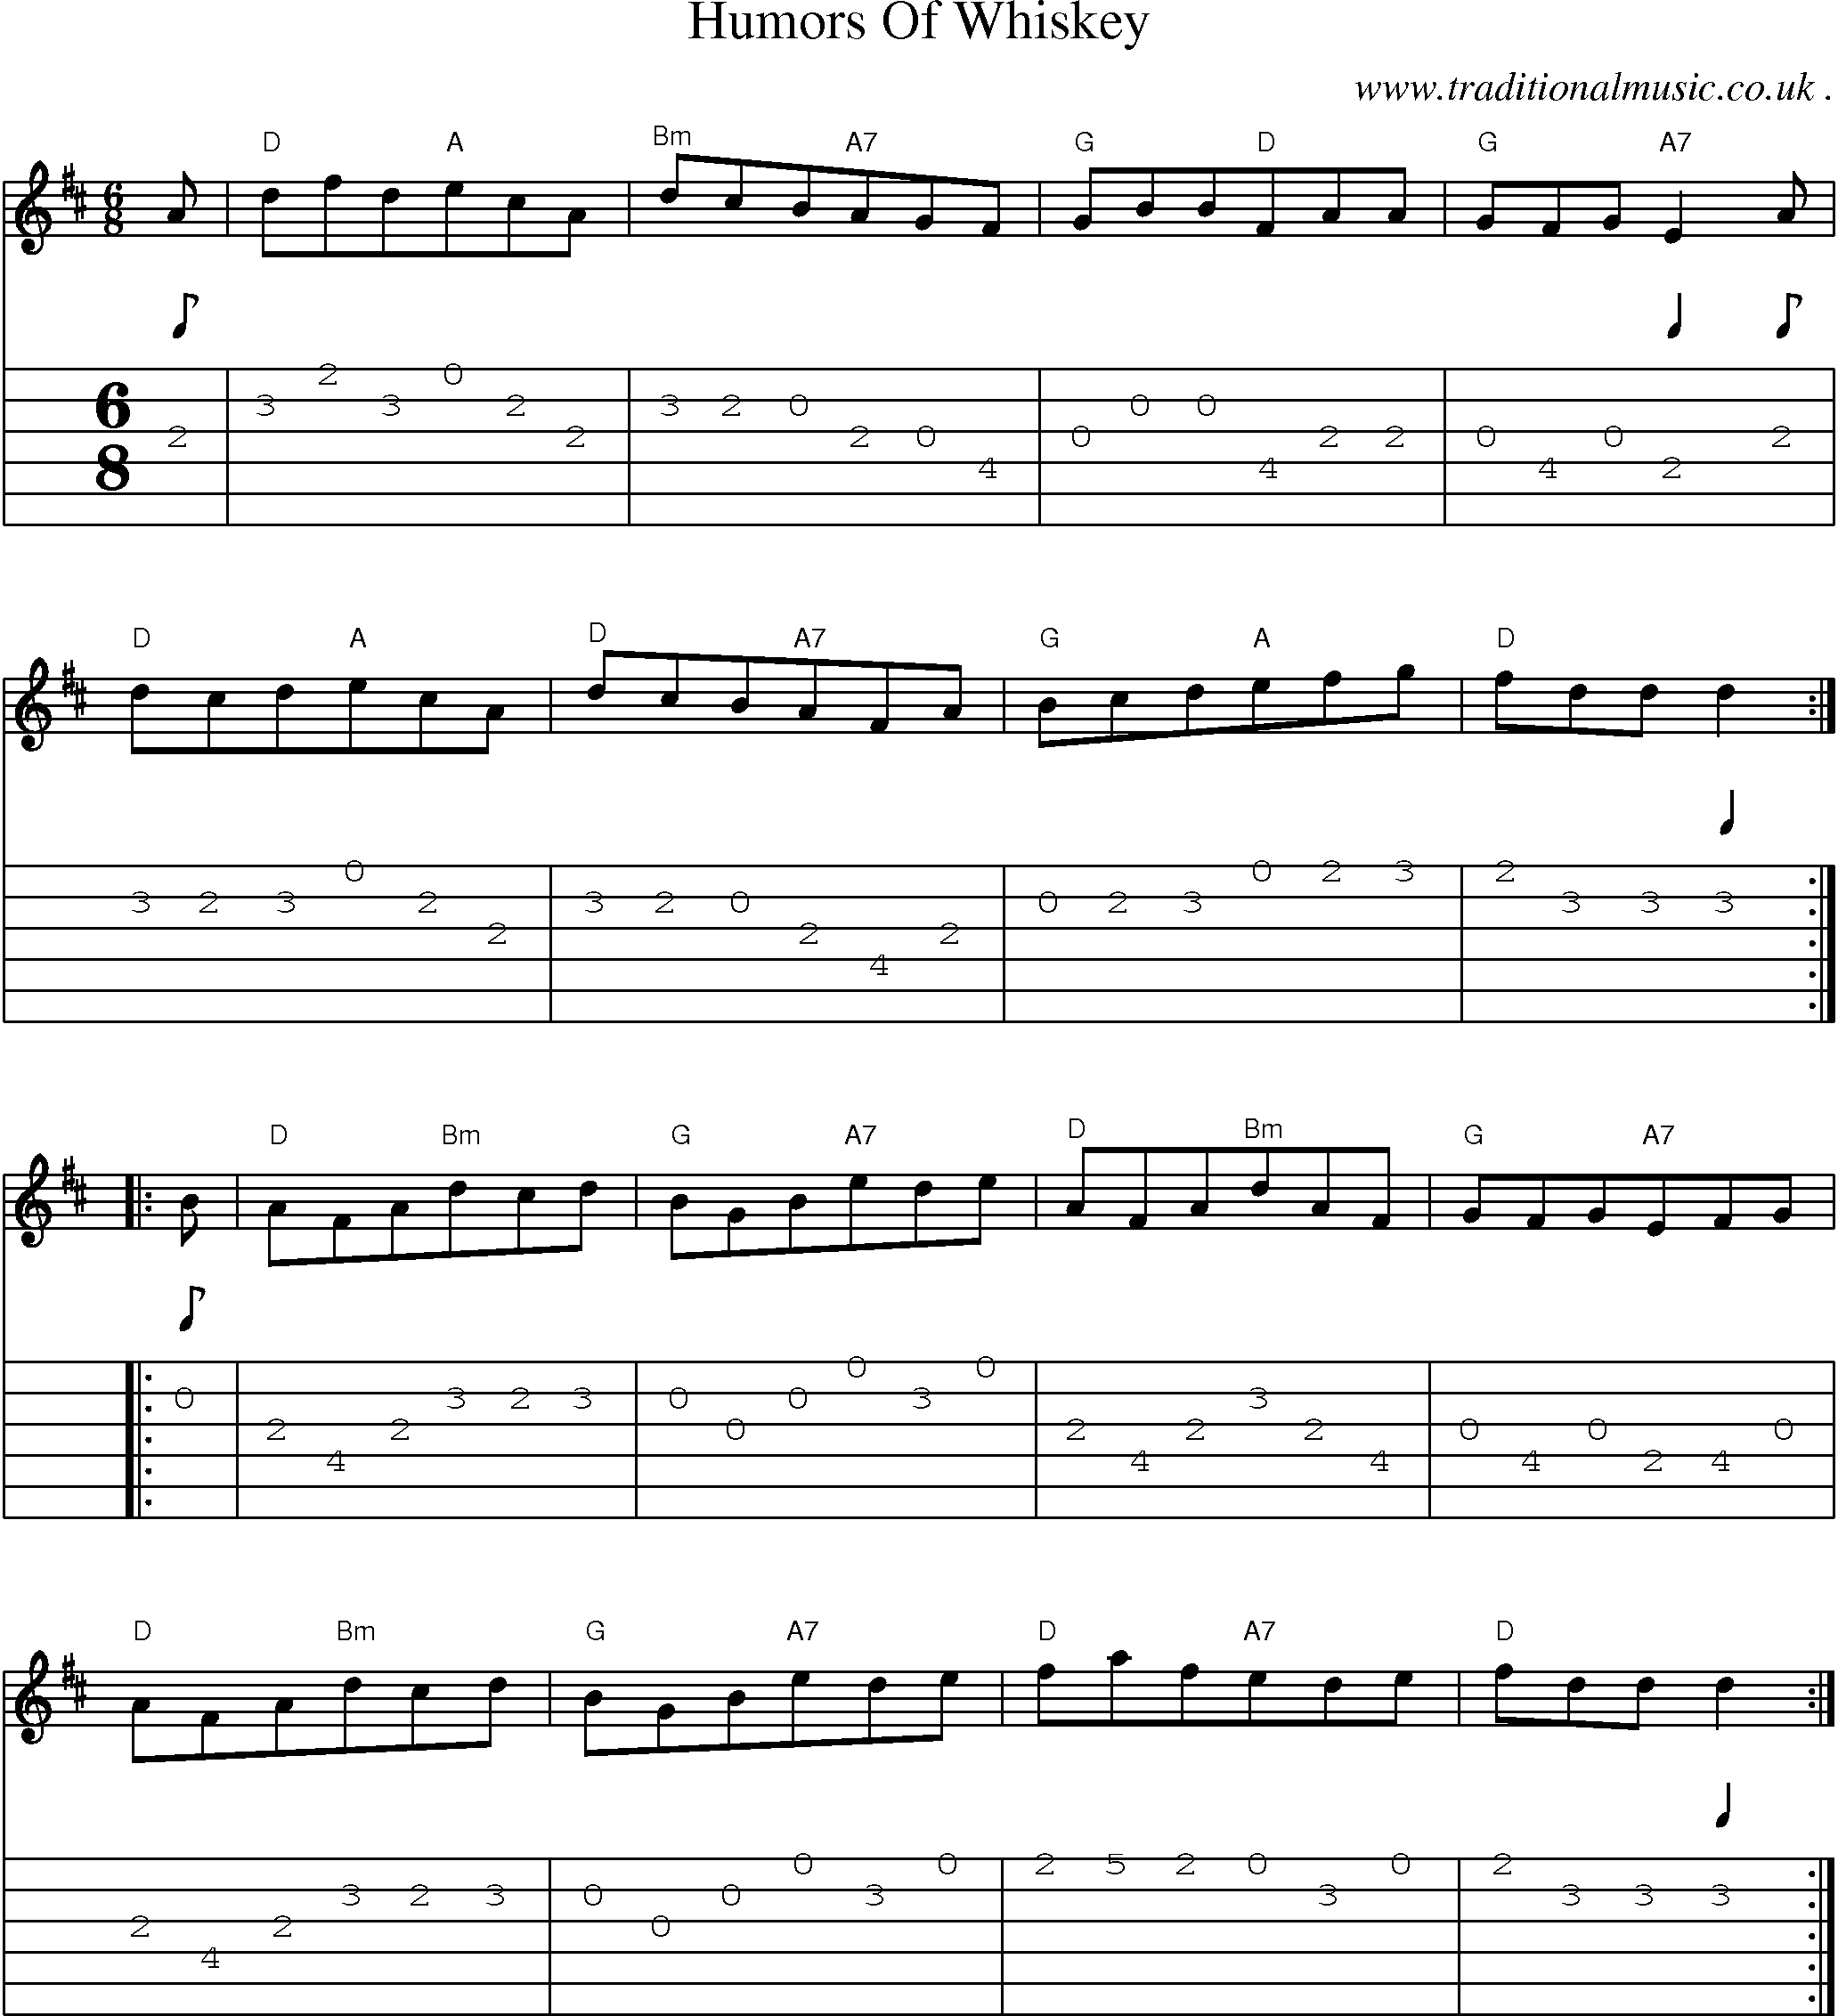 Sheet-Music and Guitar Tabs for Humors Of Whiskey